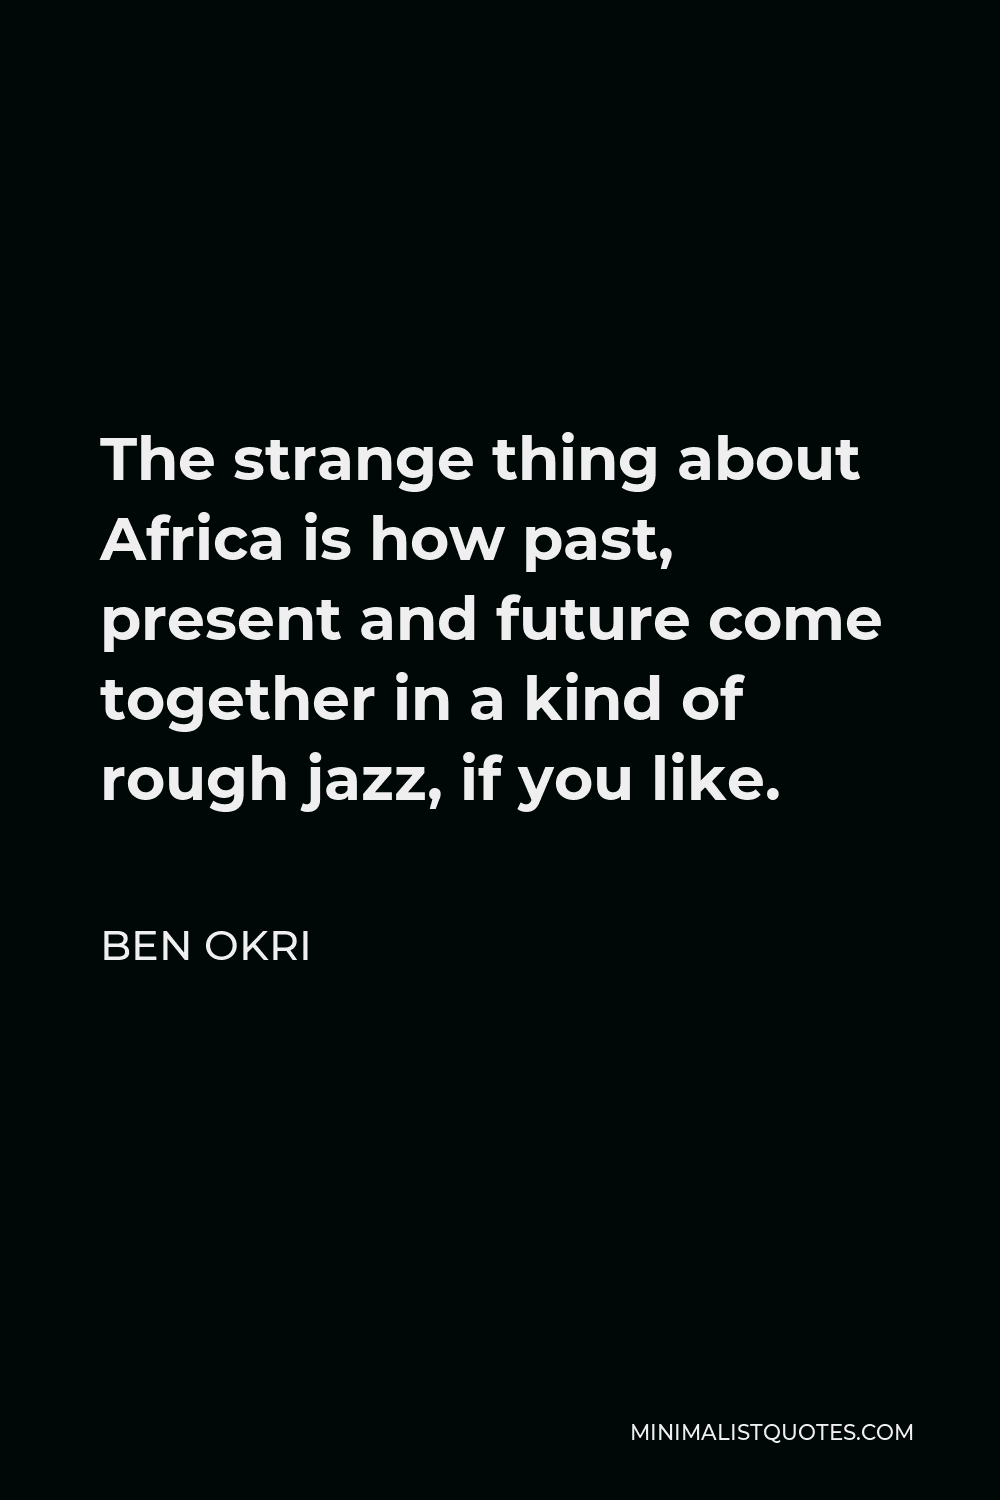 Ben Okri Quote - The strange thing about Africa is how past, present and future come together in a kind of rough jazz, if you like.